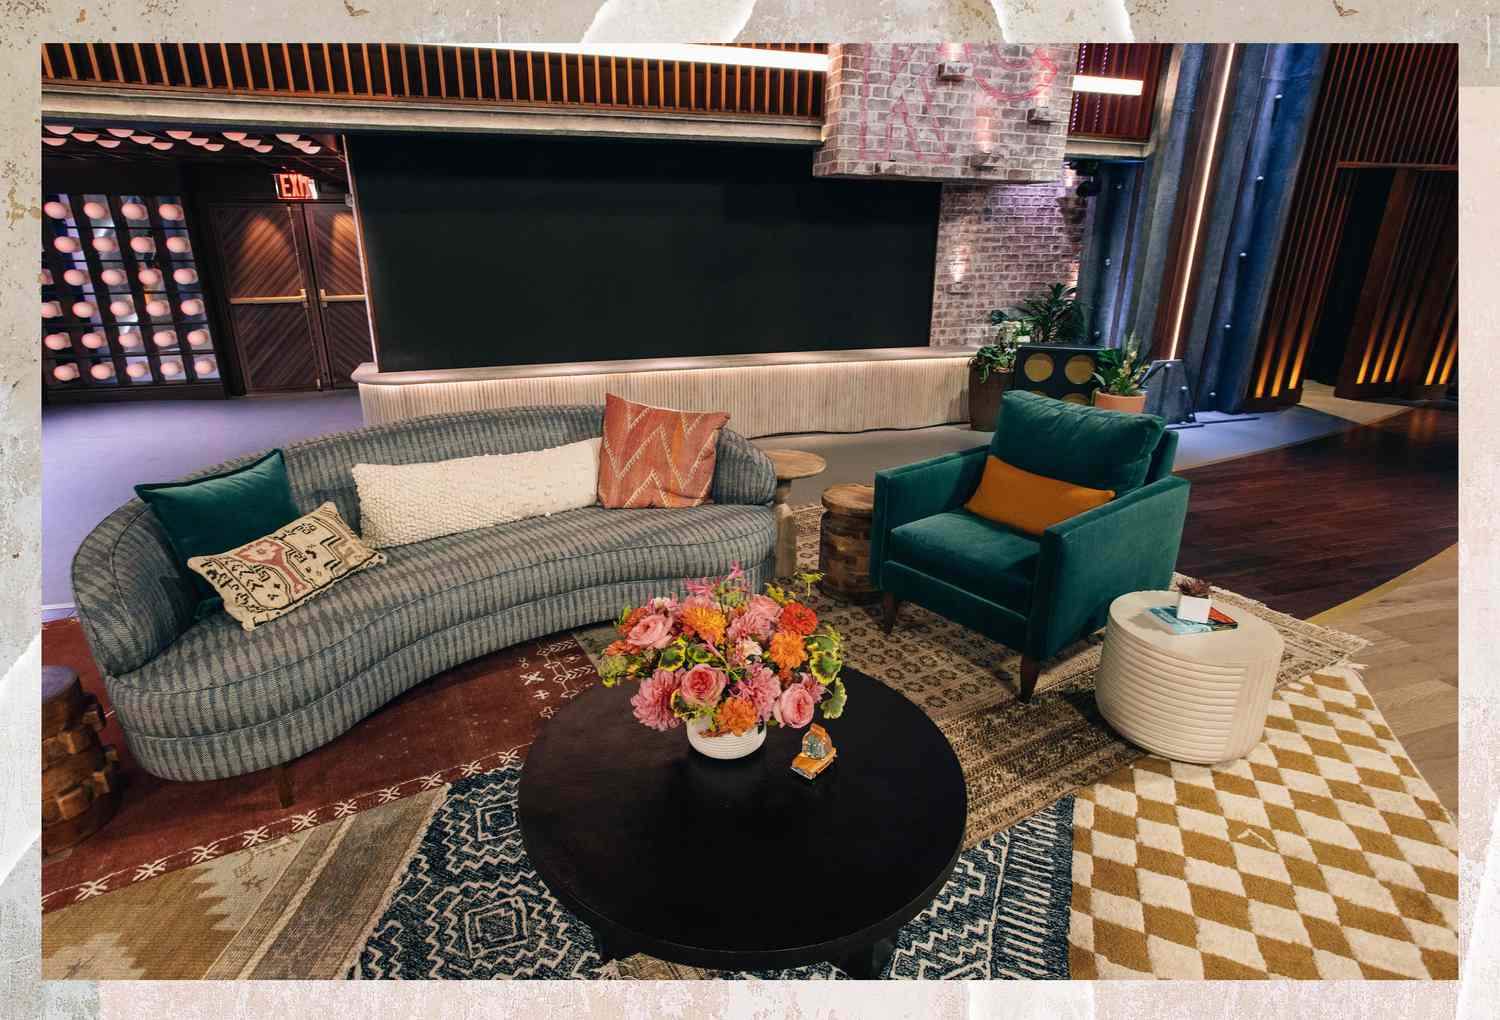 Kelly Clarkson's sitting area on her new talk show set